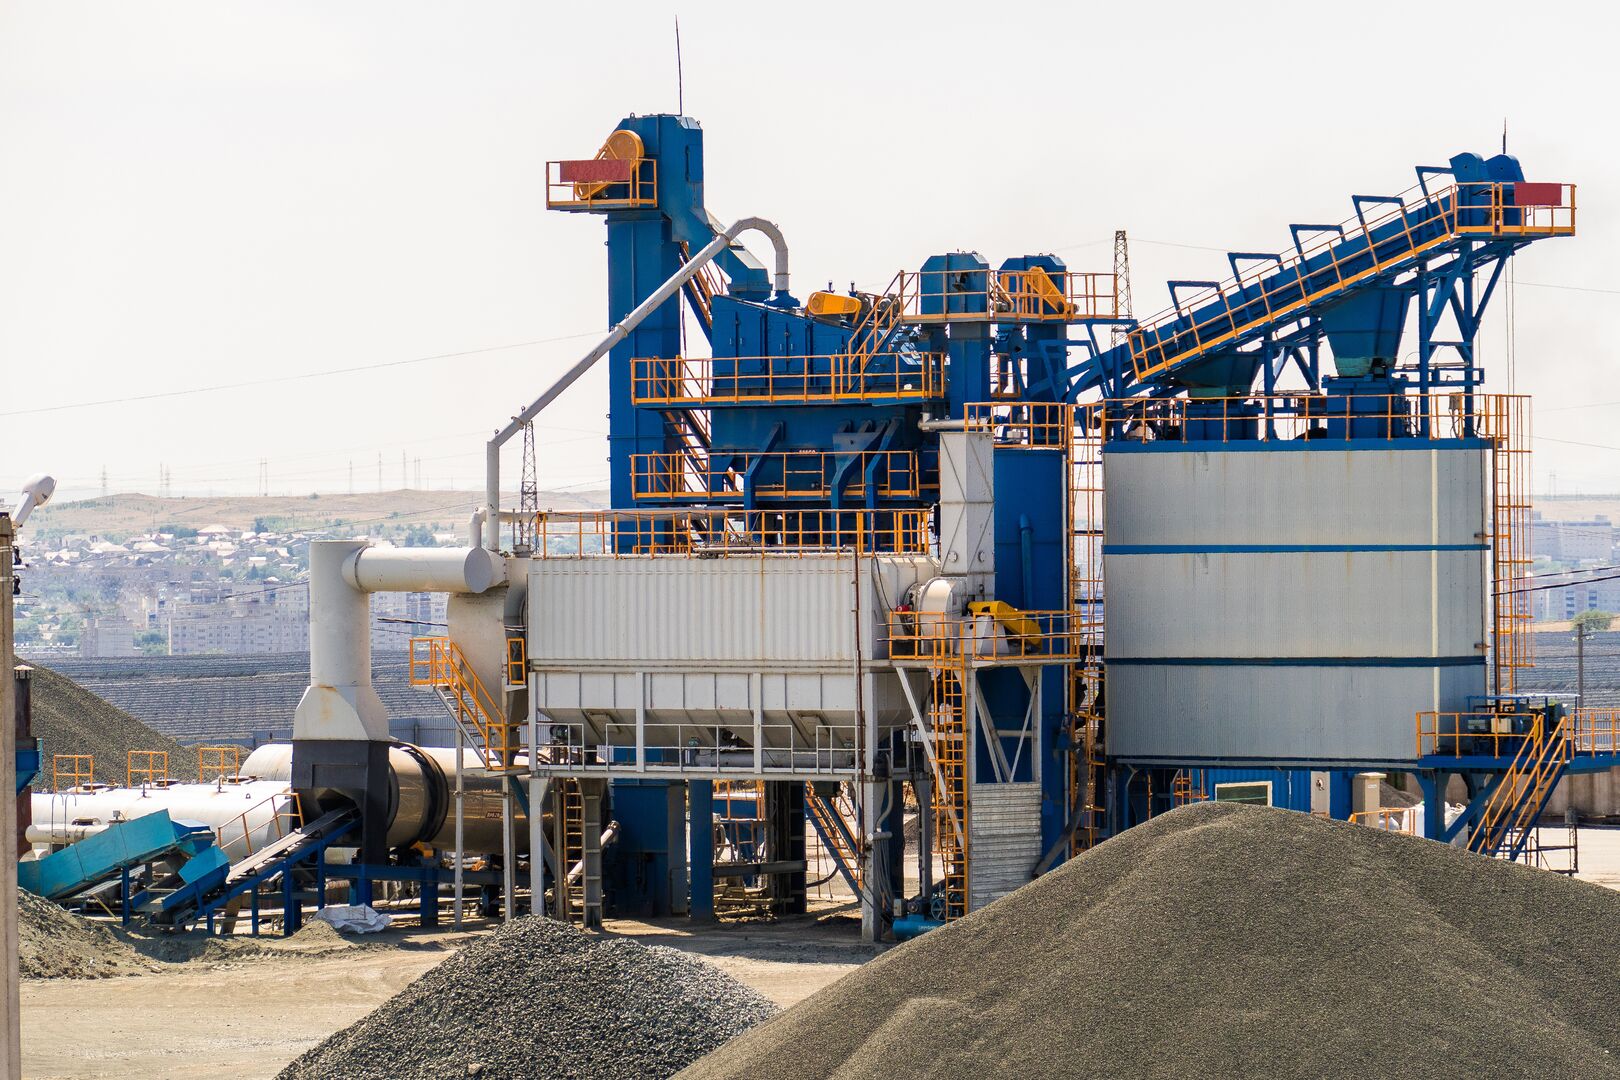 A cement plant, which emits significant amounts of CO2